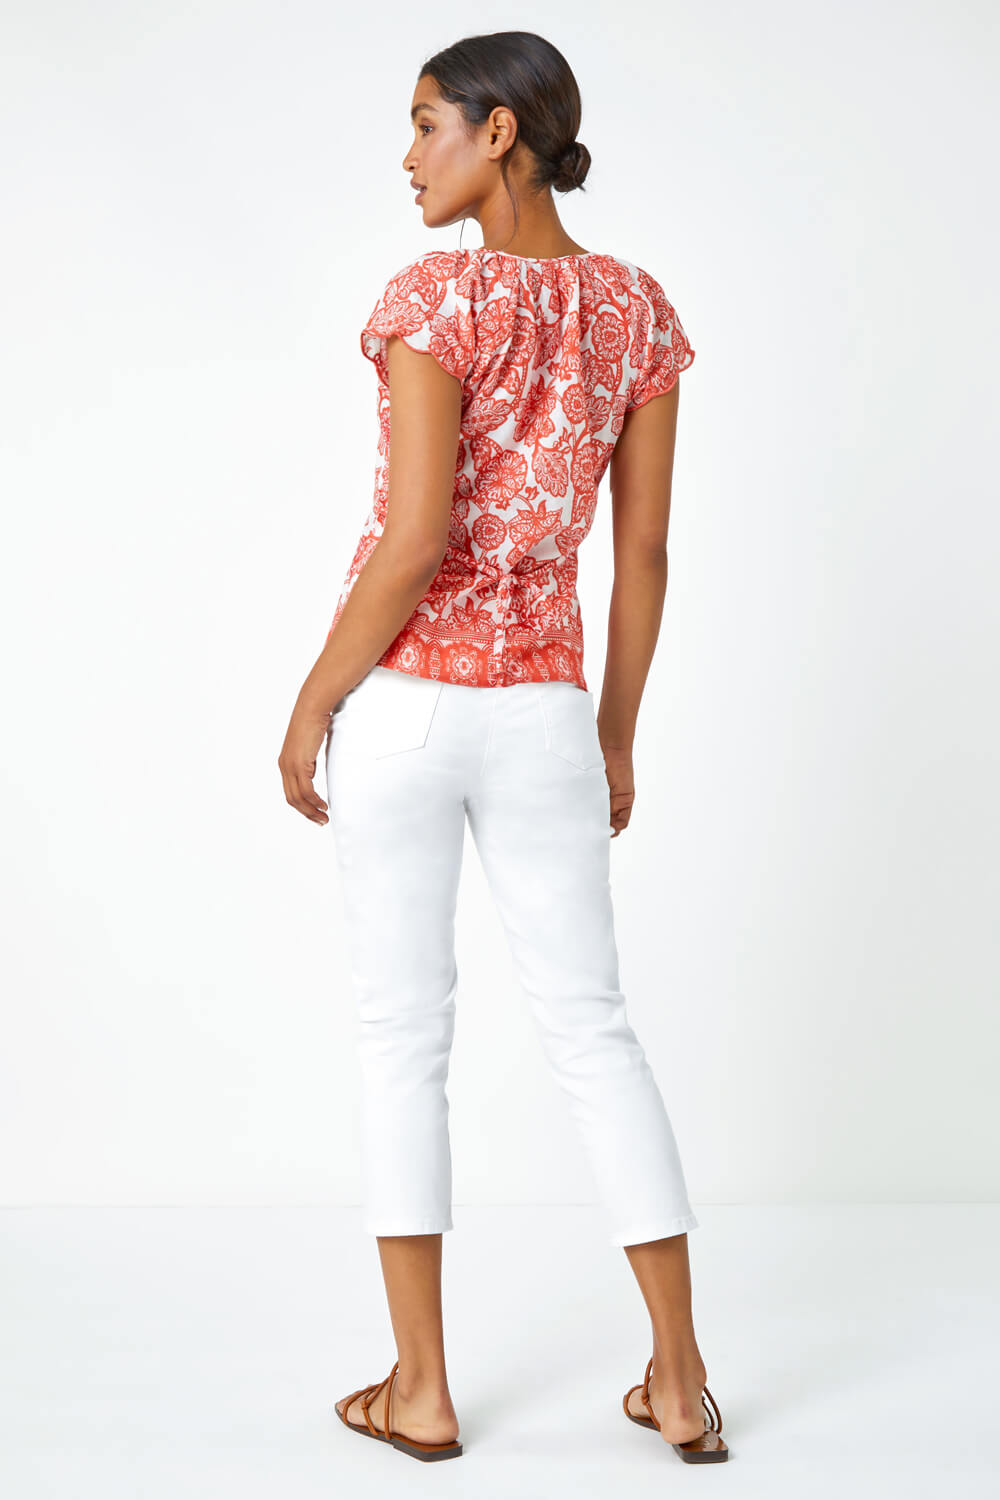 CORAL Floral Print Cotton Top, Image 4 of 5